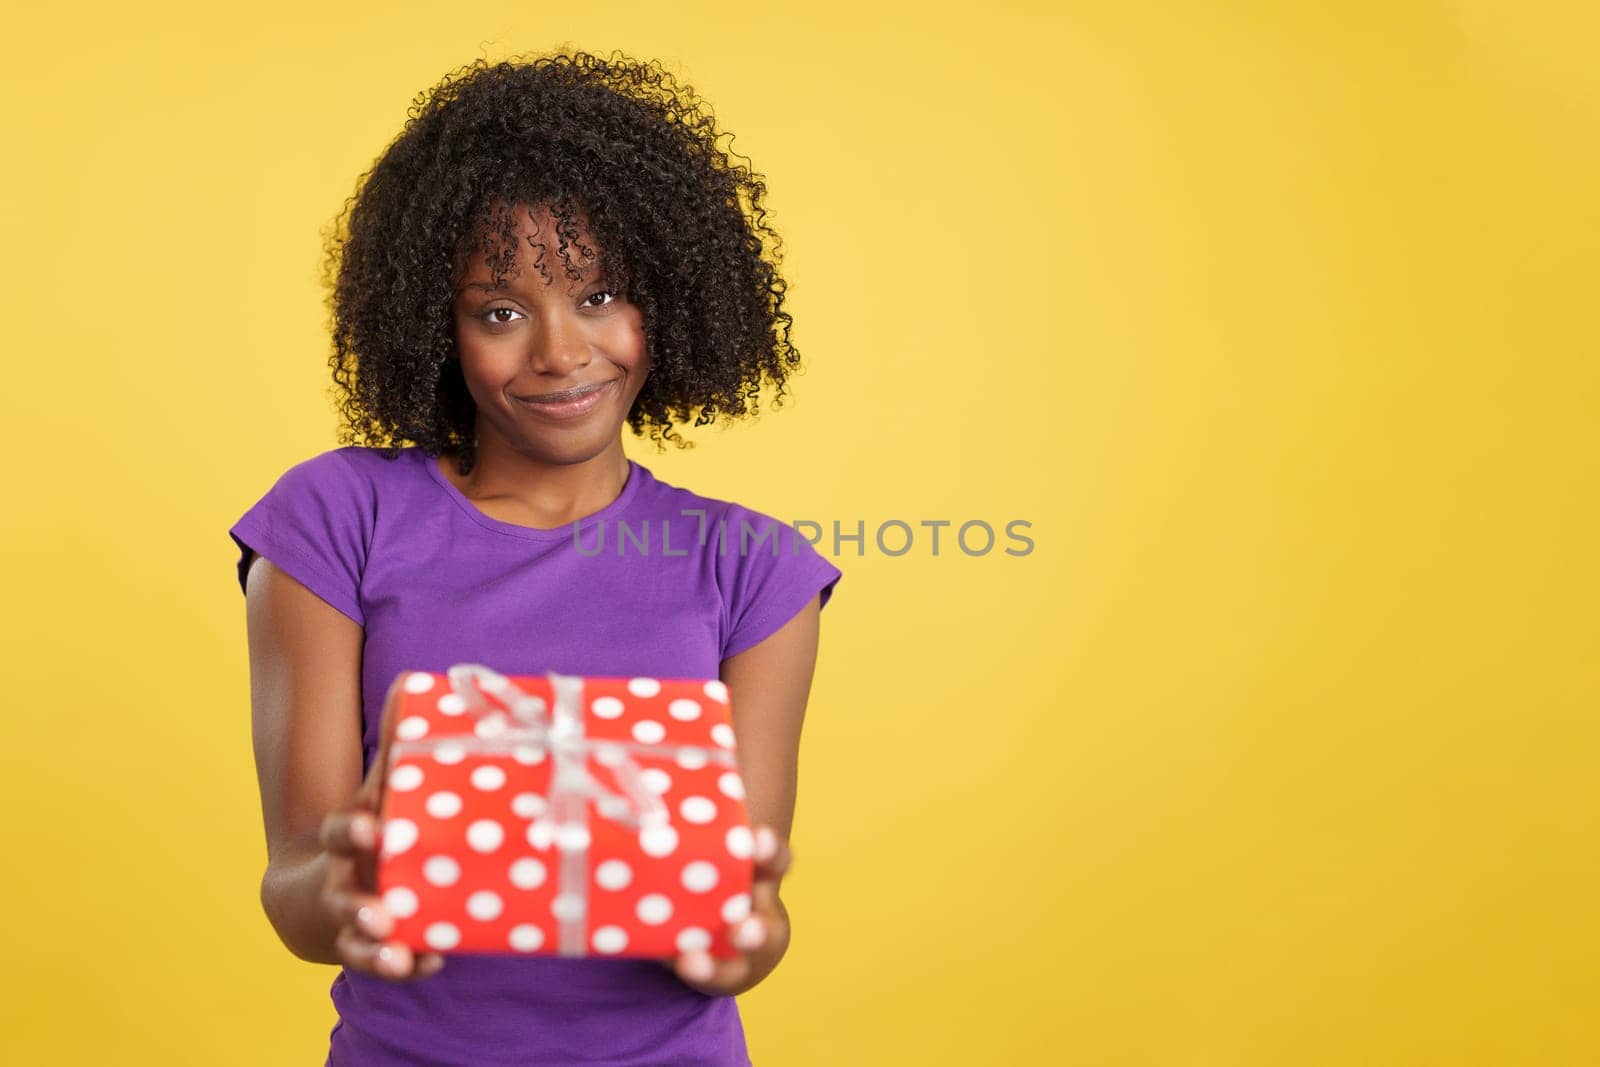 Generous woman with afro hair giving a present while looking at camera in studio with yellow background